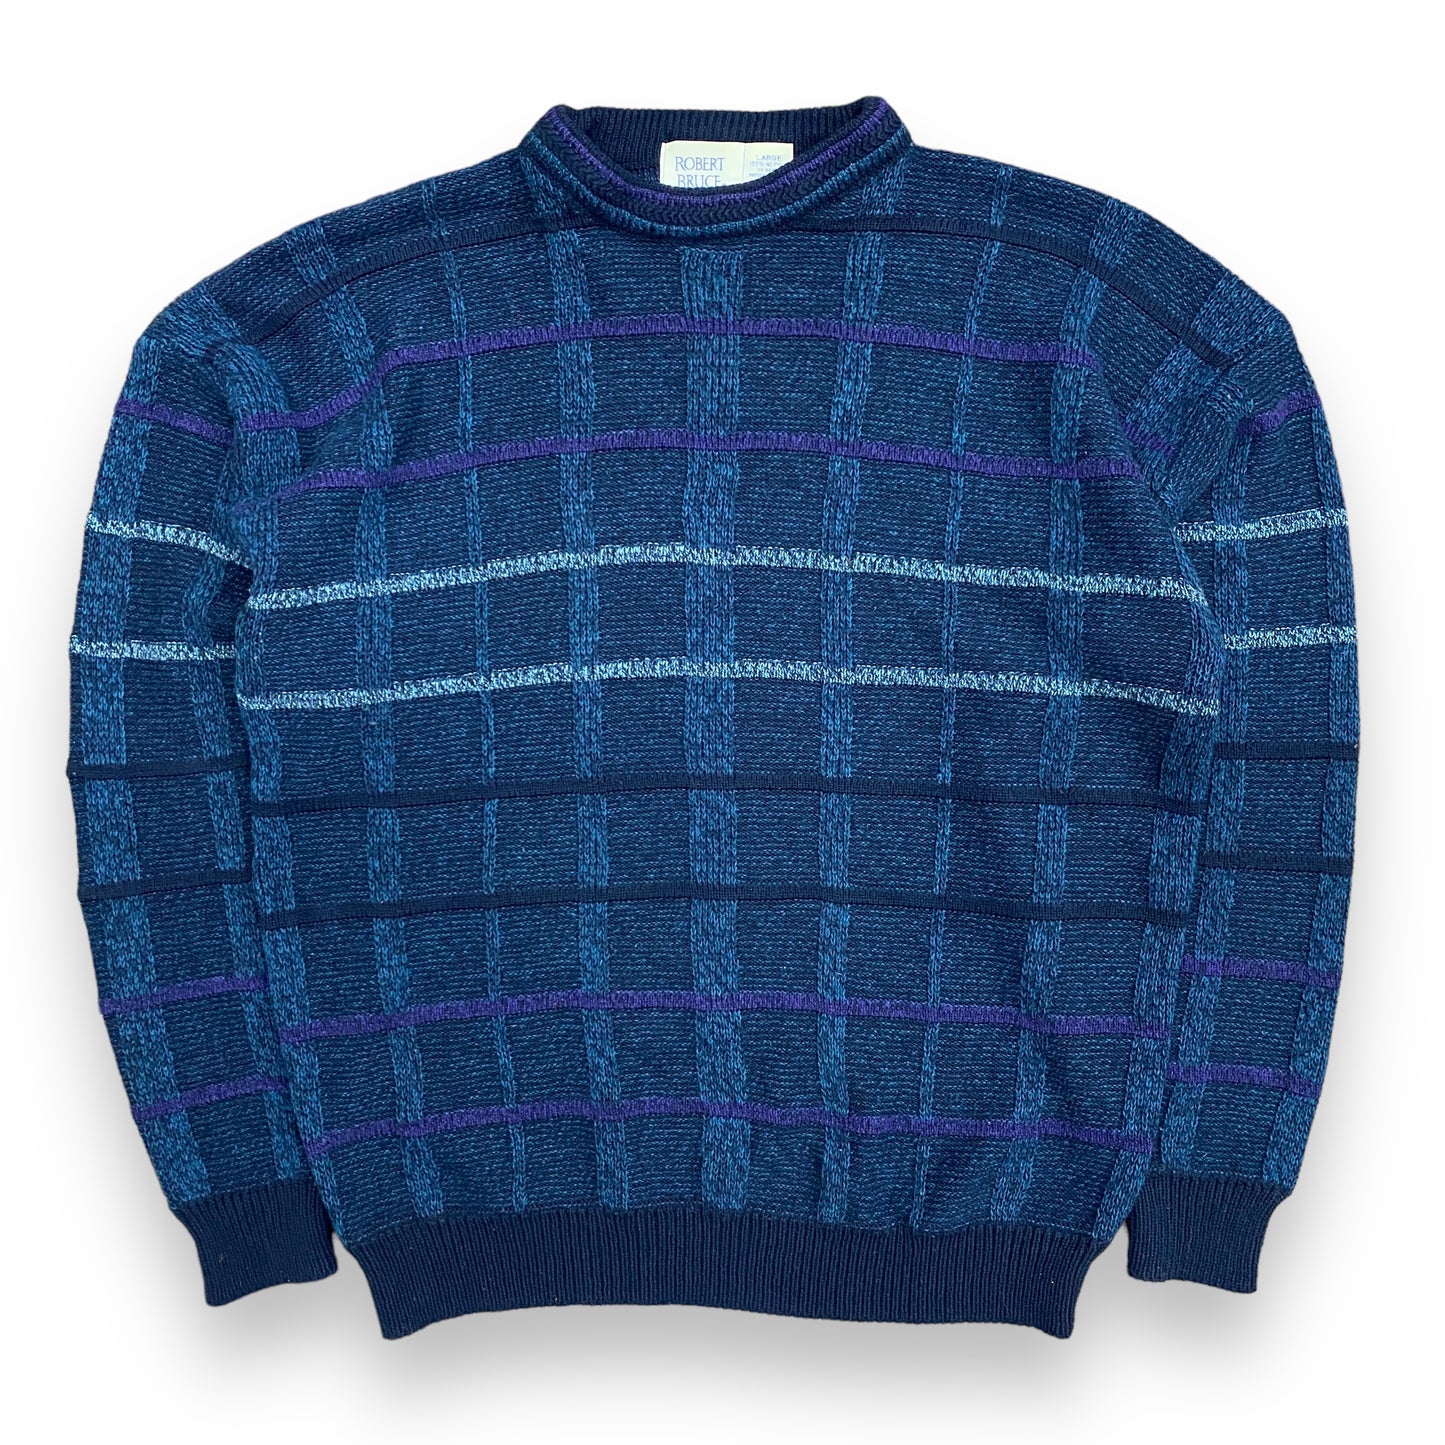 Vintage 90s Robert Bruce Navy Blue & Purple Checkered Sweater - Size Large